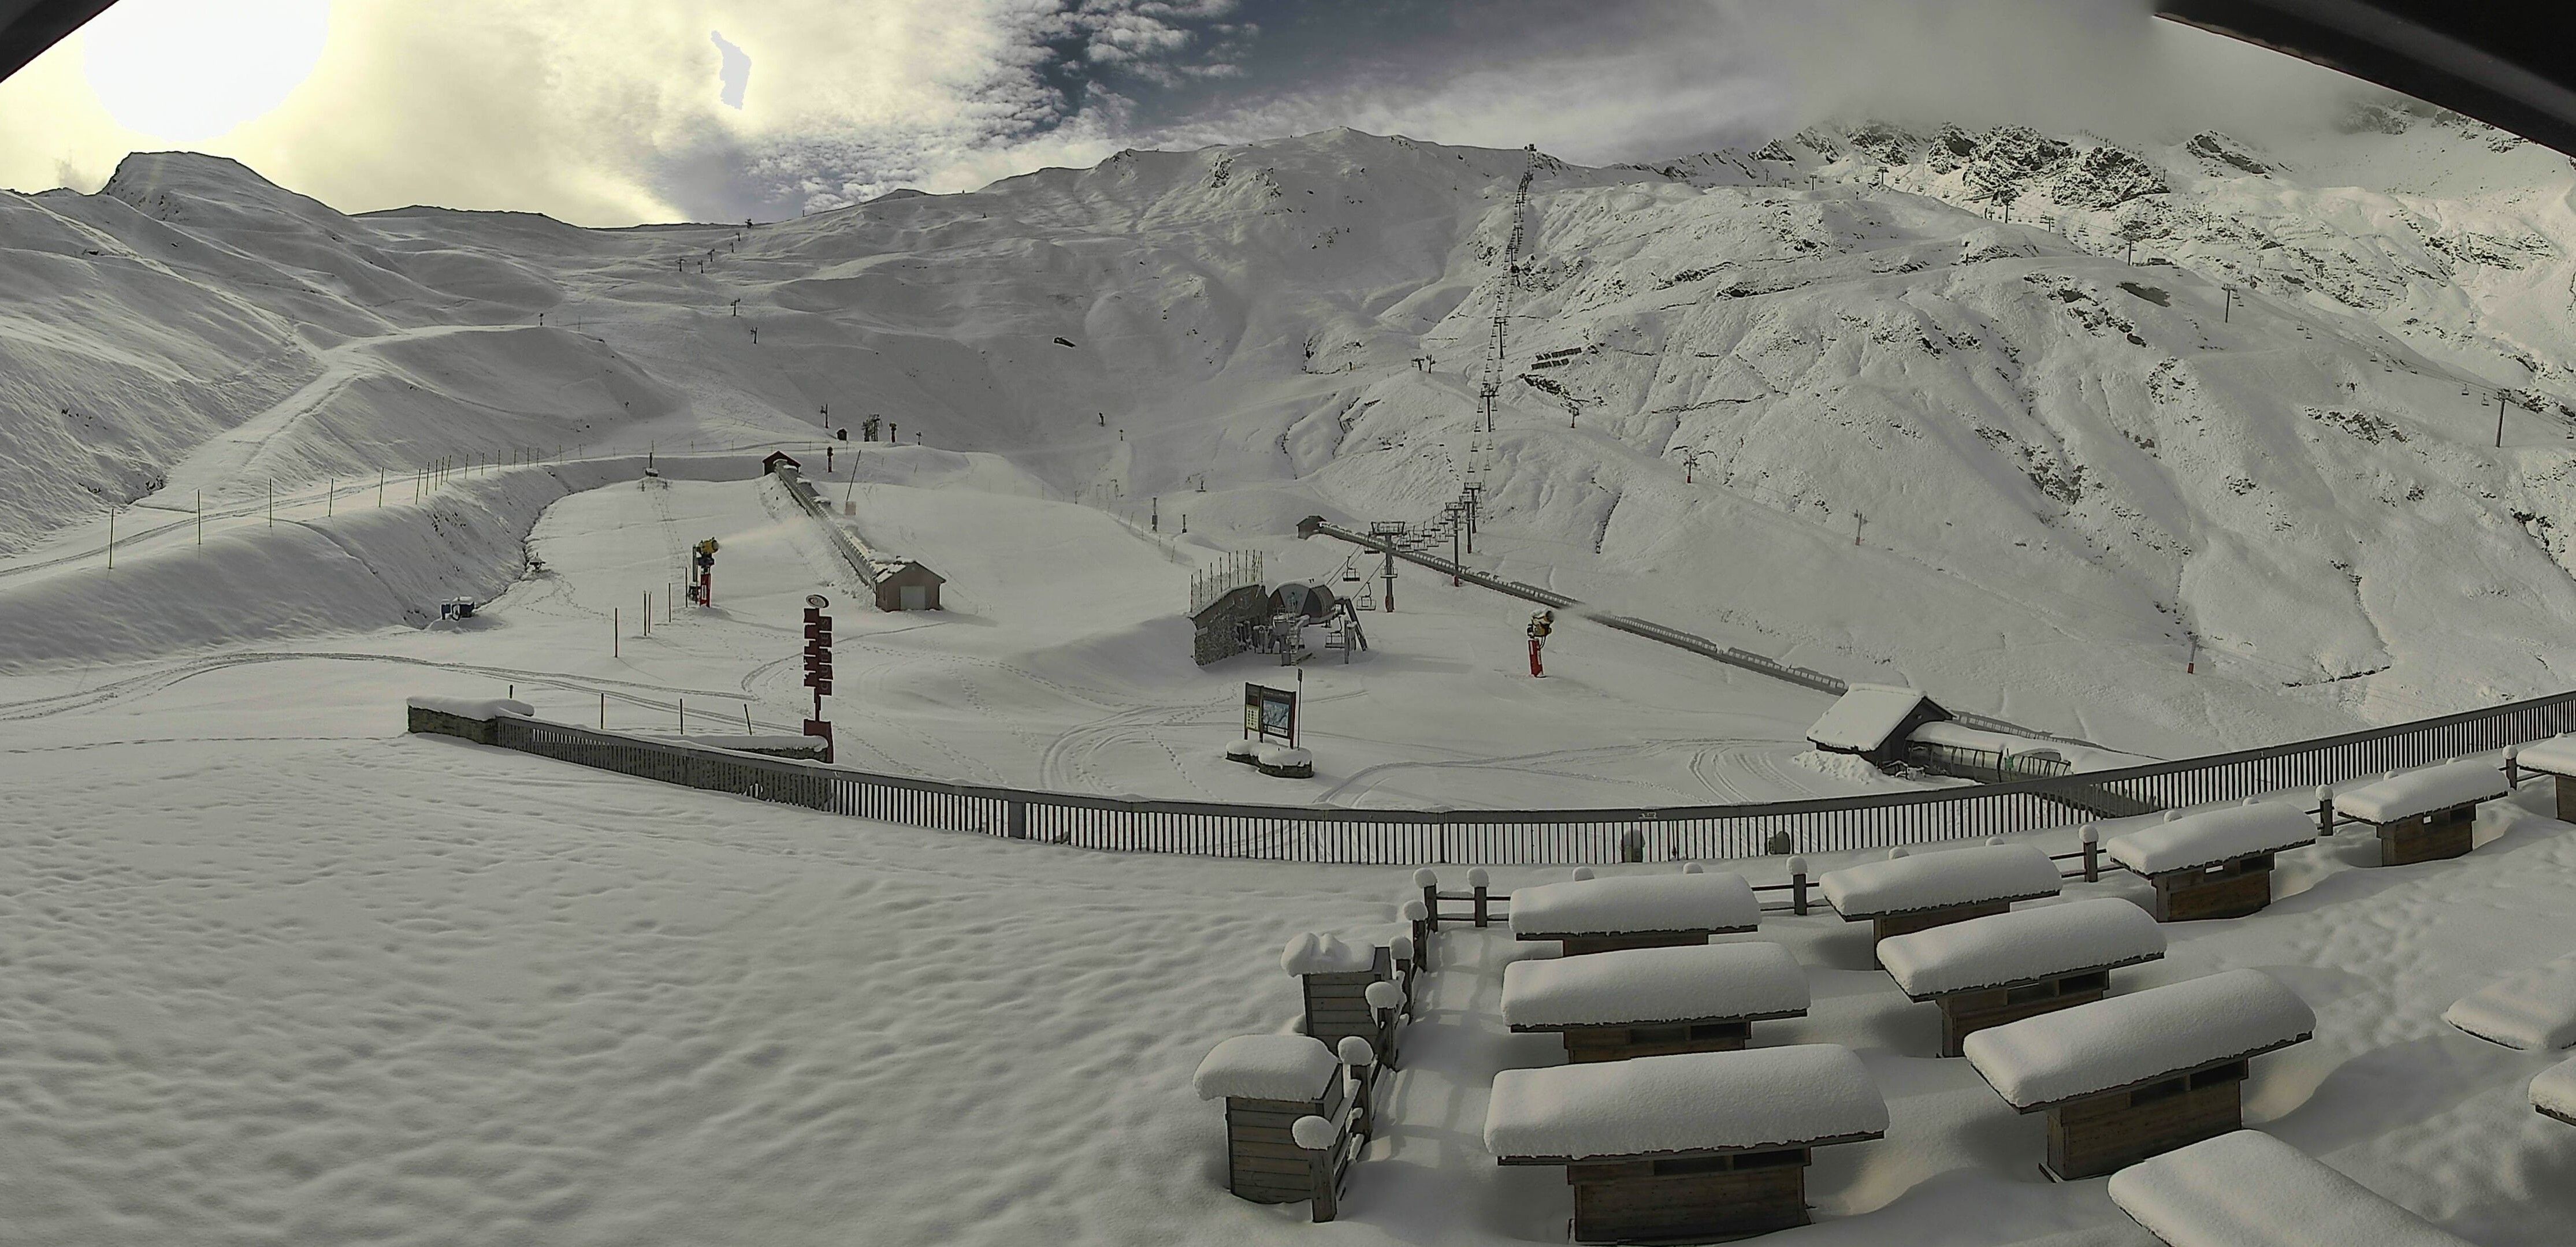 Cauterets in French Pyrenees received already some fresh snow, but there is much more to come (skaping.com)